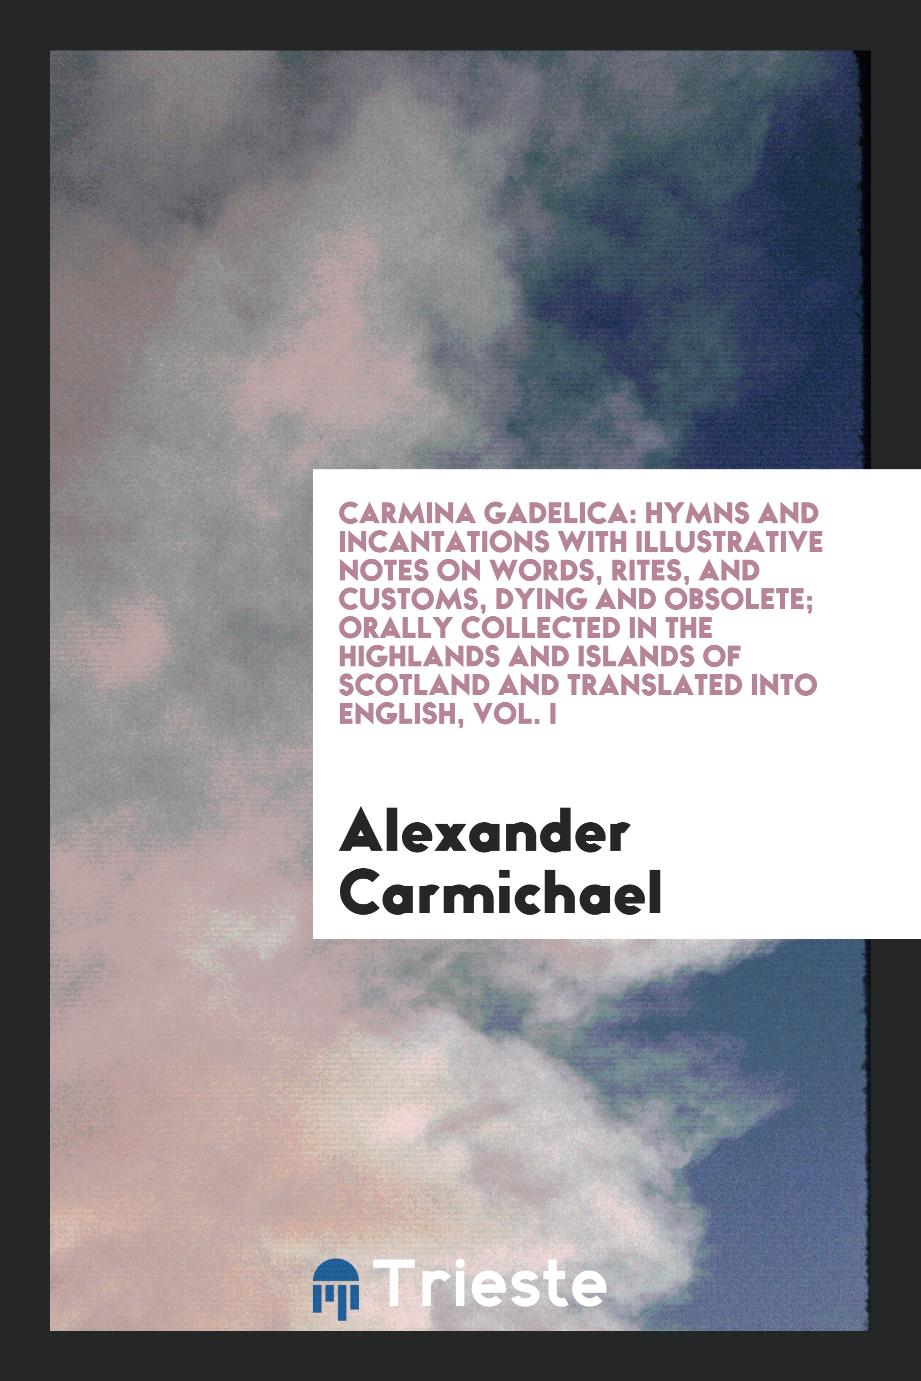 Carmina Gadelica: Hymns and Incantations with Illustrative Notes on Words, Rites, and Customs, Dying and Obsolete; Orally Collected in the Highlands and Islands of Scotland and Translated into English, Vol. I